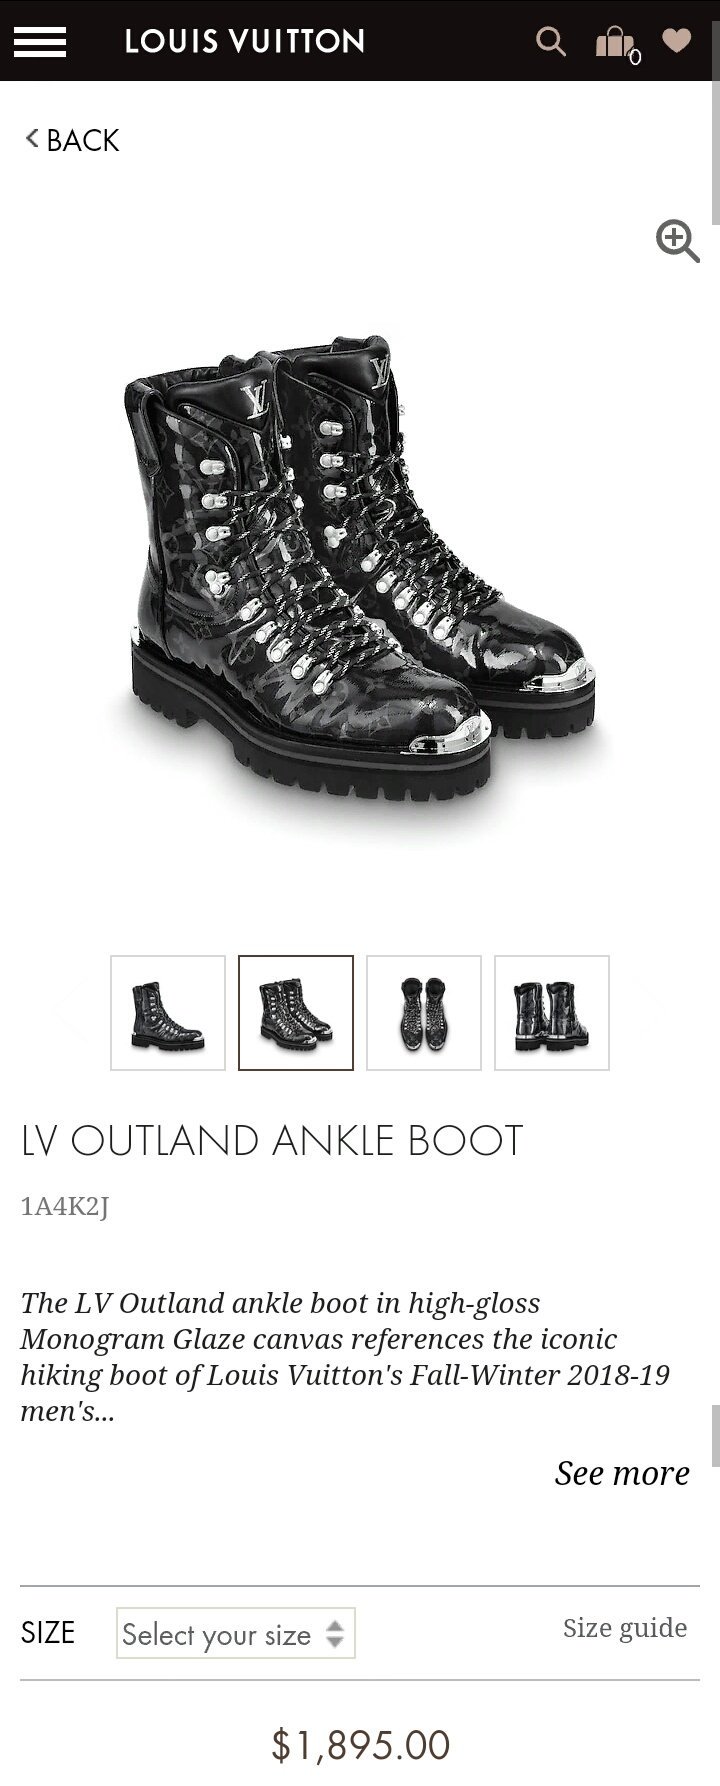 hztttao on X: Tao was wearing Louis Vuitton LV outland ankle boot   / X